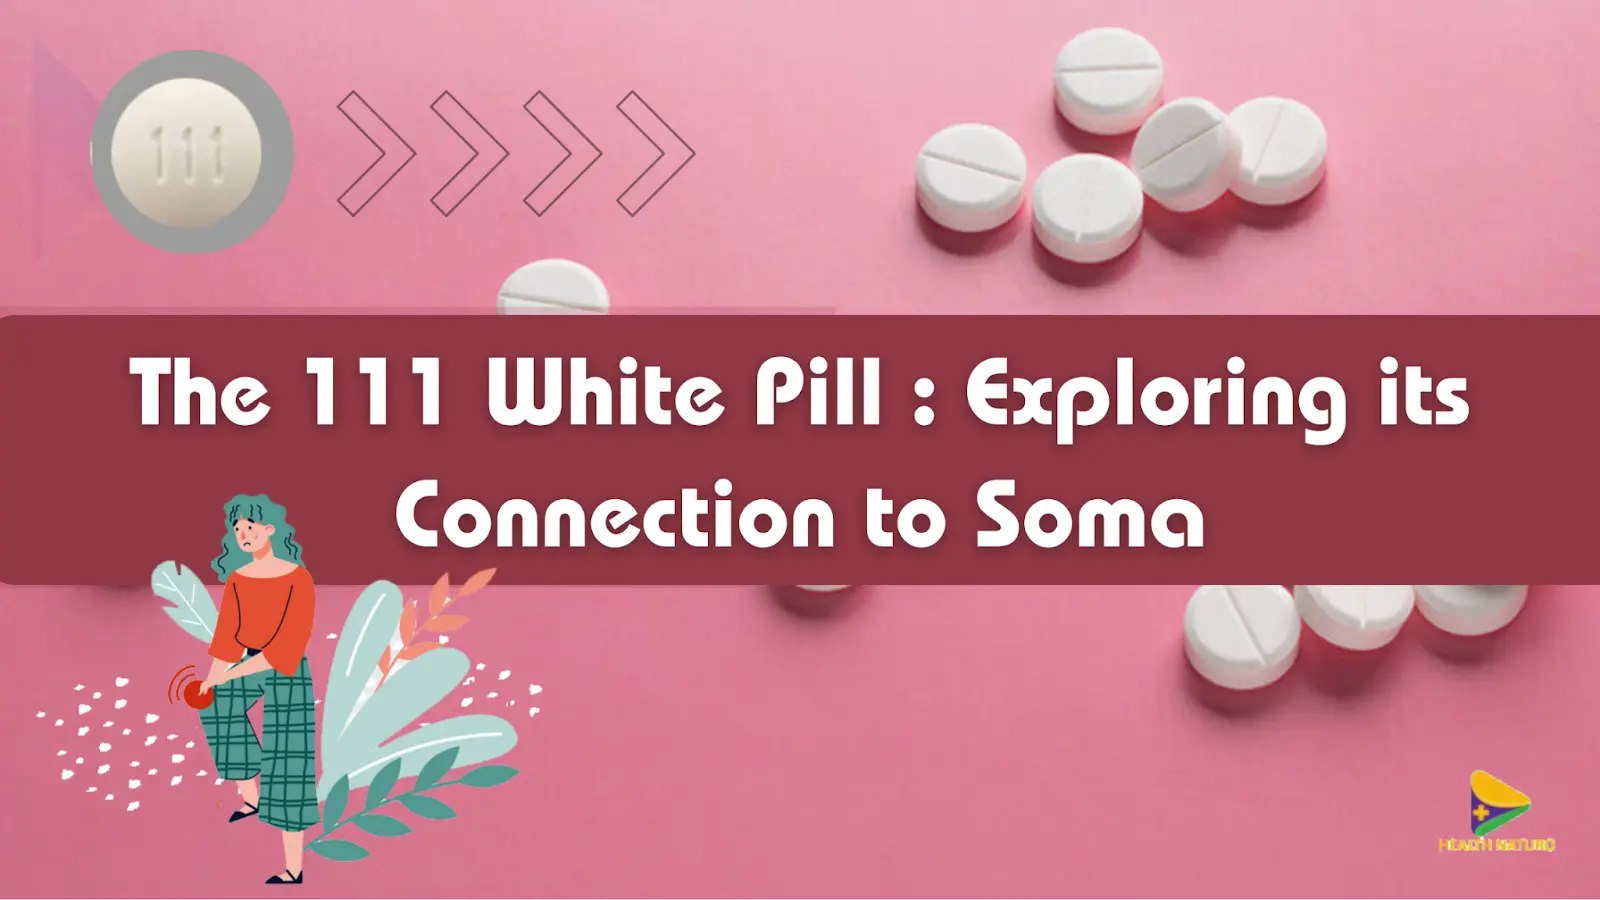 The 111 White Pill: Exploring its Connection to Soma